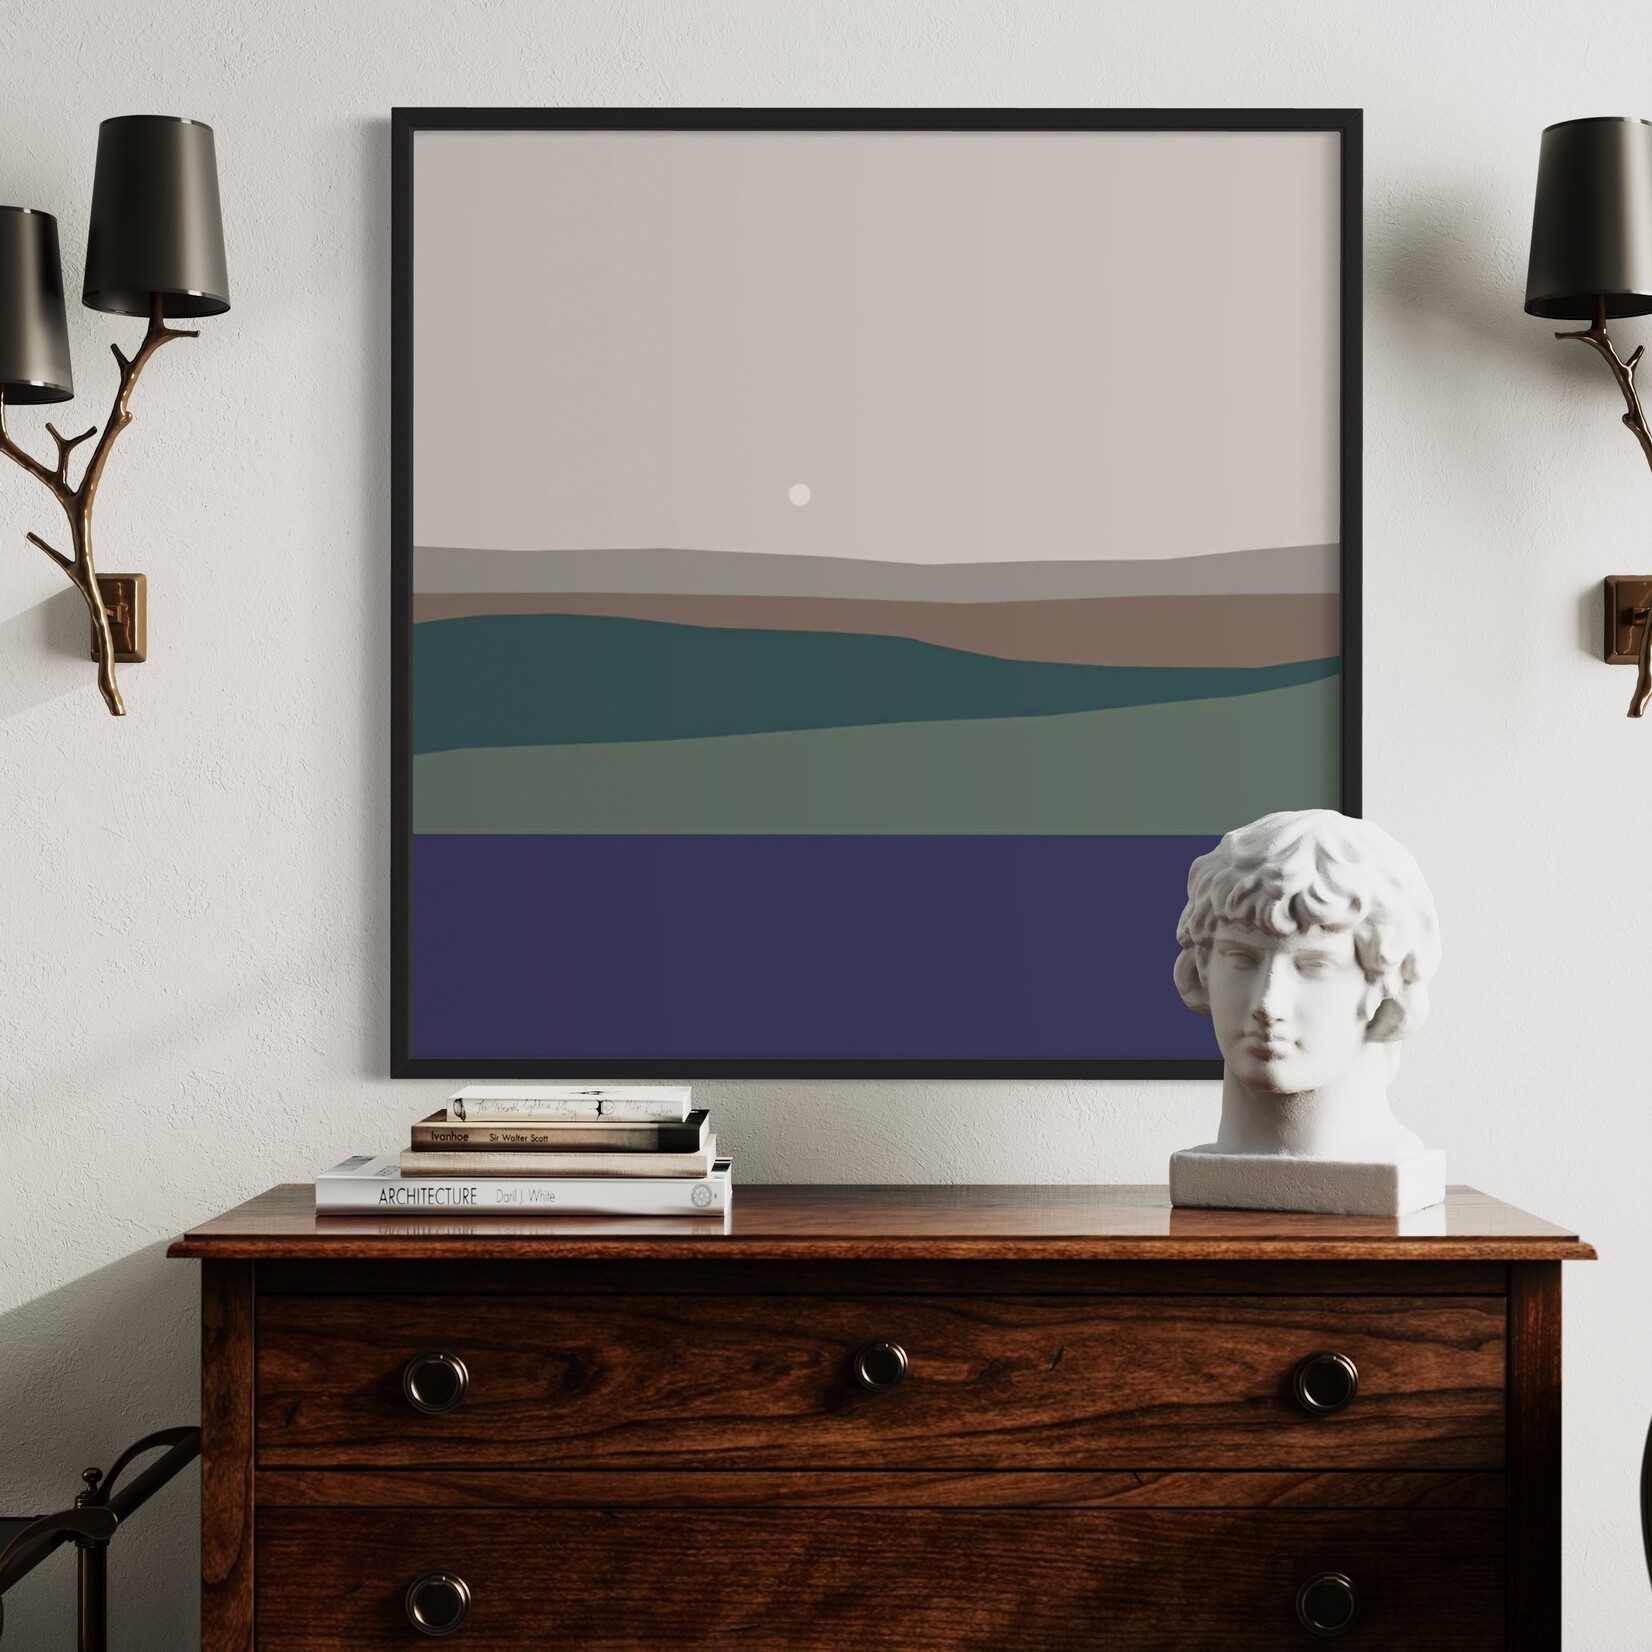 The Picturalist | Fine Art Print on Rag Paper Landscape with Full Moon by Alejandro Franseschini